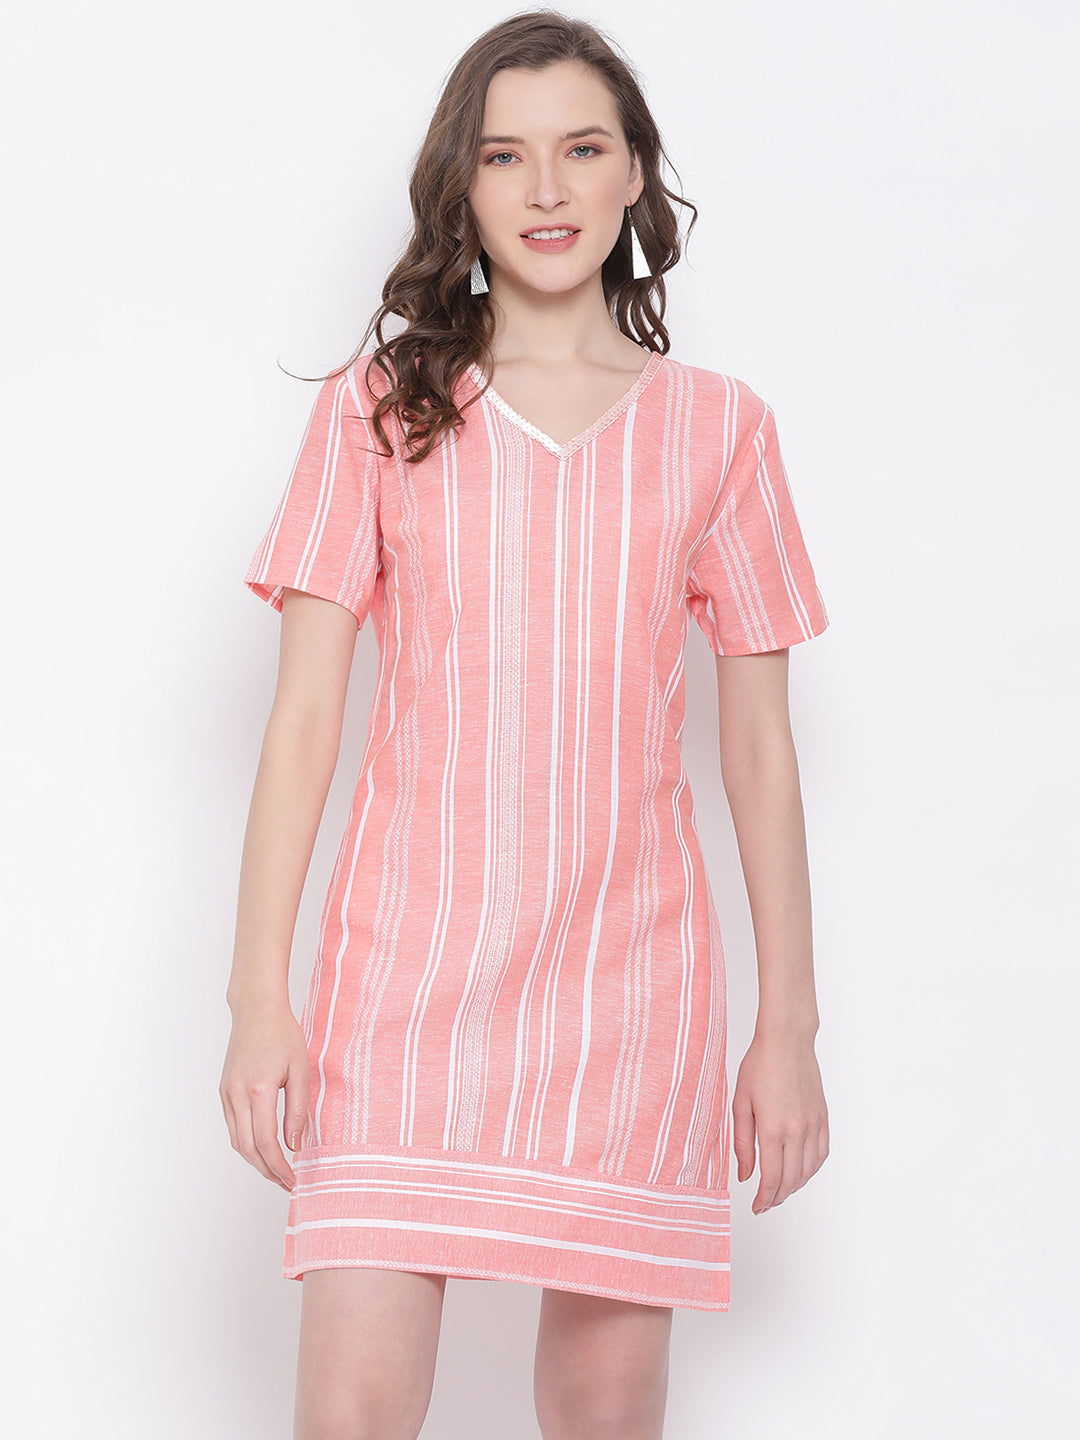 LY2 Cotton Peach V-Neck Short Sleeves A-Line Party Dress For Women